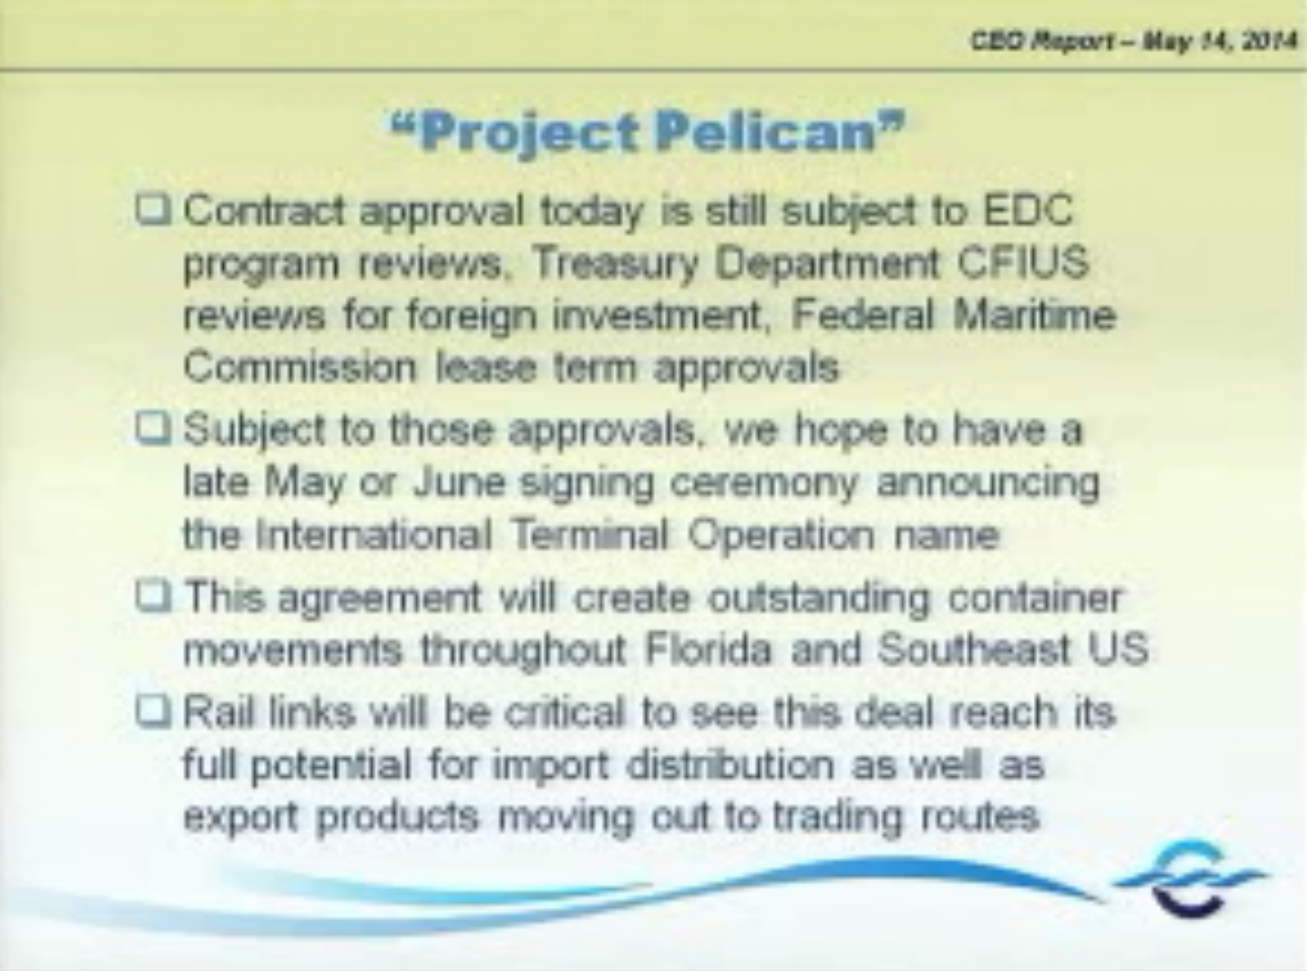 John Walsh's Project Pelican CEO Report. Source: Canaveral Port Authority